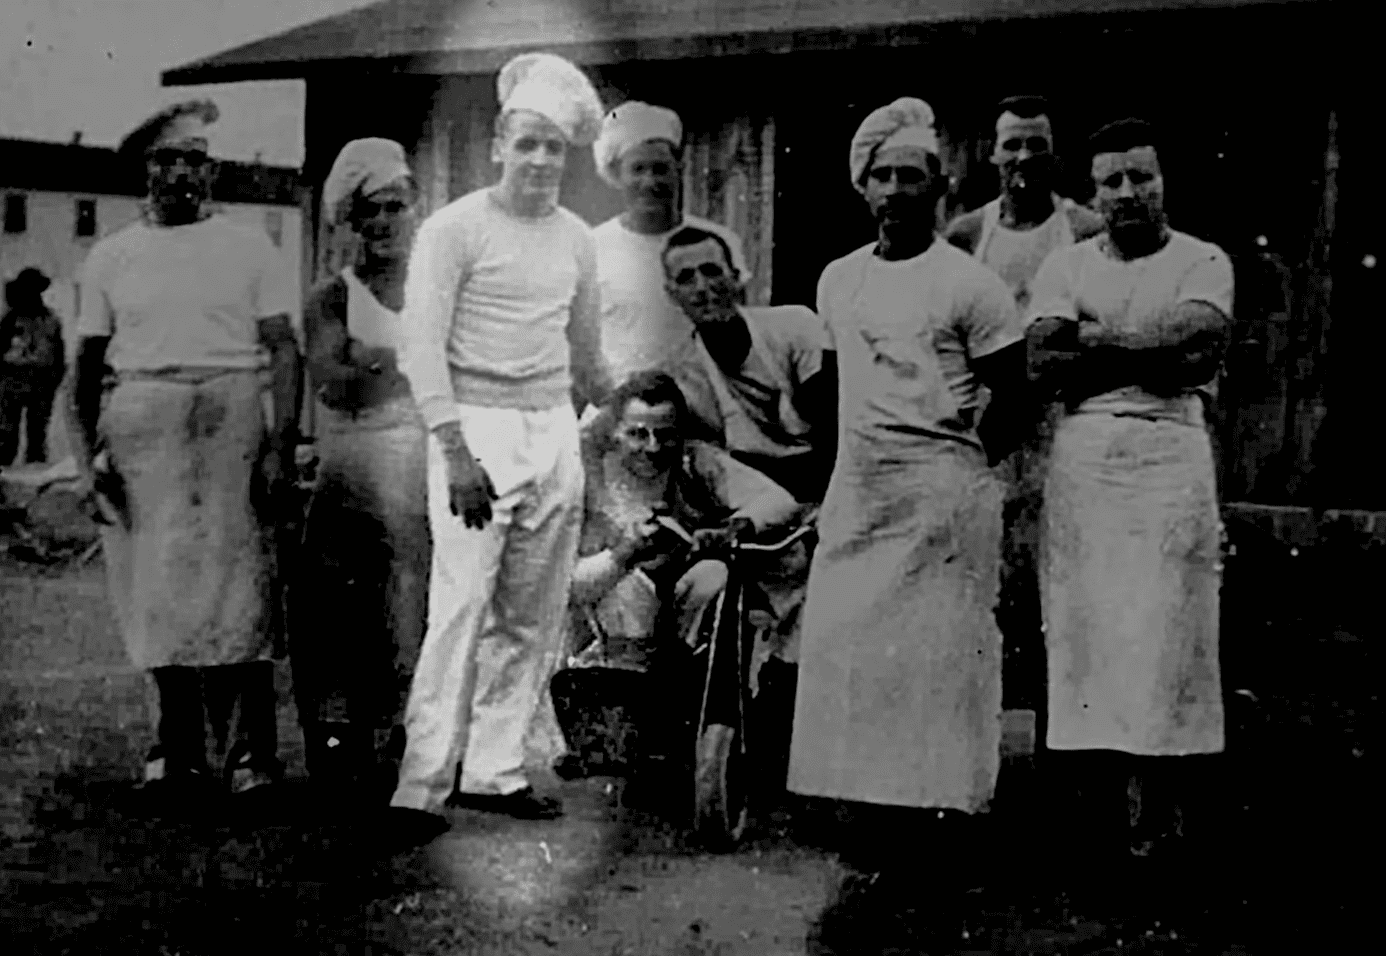 A group photo of Friedrich and his chef colleagues. | Source: youtube.com/HEC Books